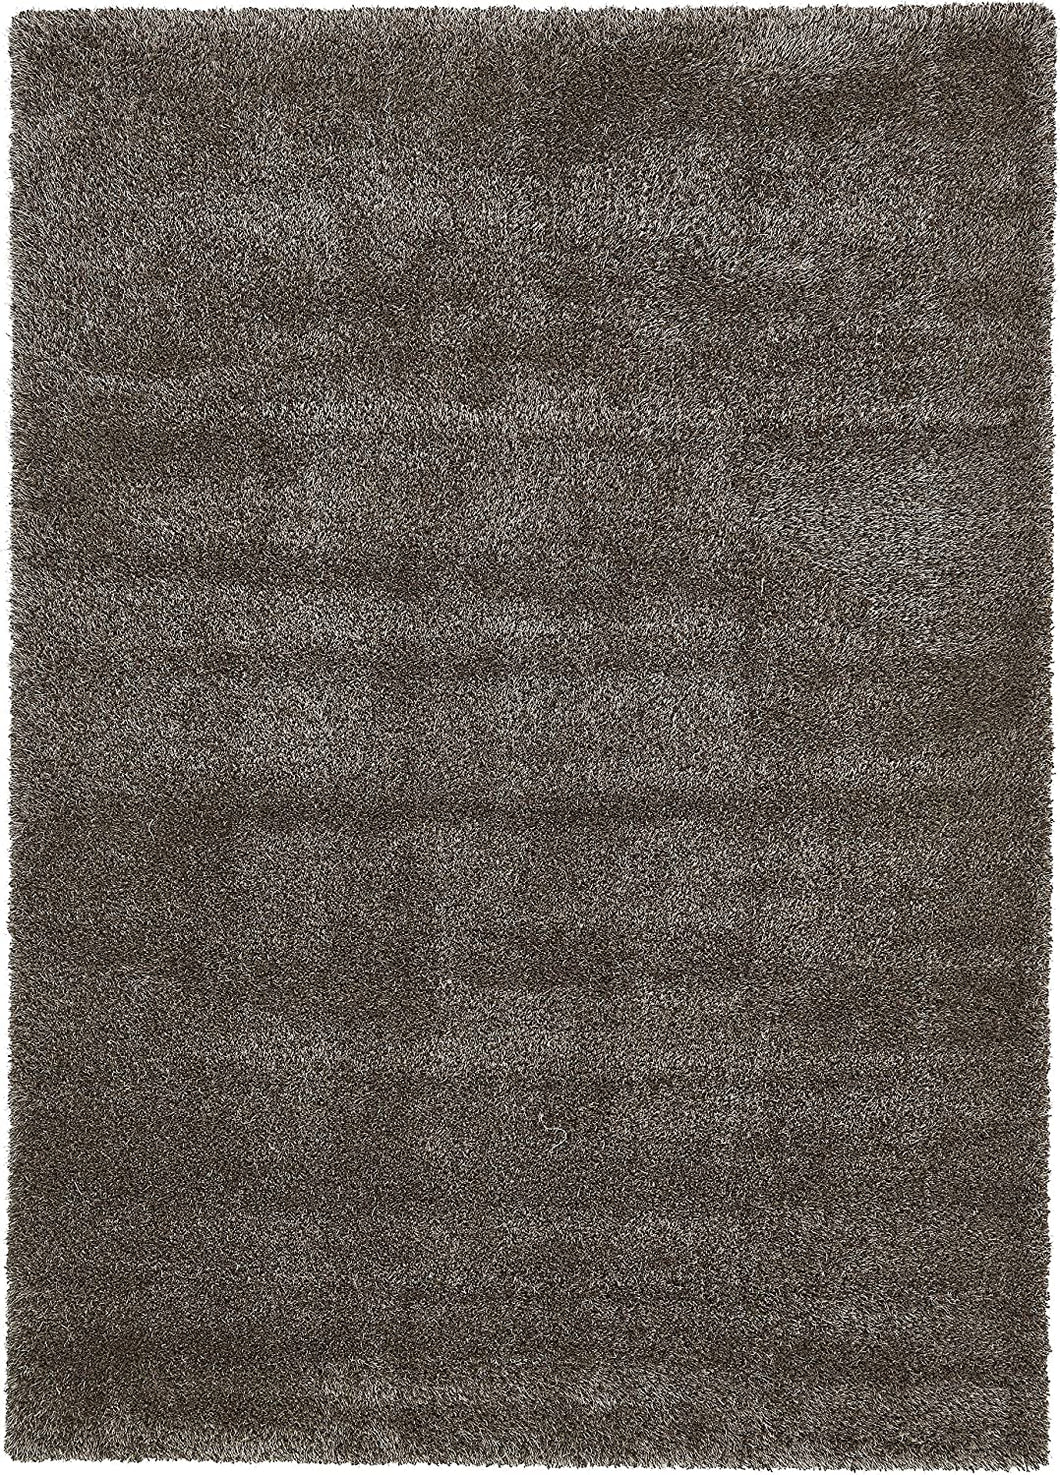 Unique Loom Luxe Solo Collection Plush Modern Pinecone Brown Area Rug (8' x 11')